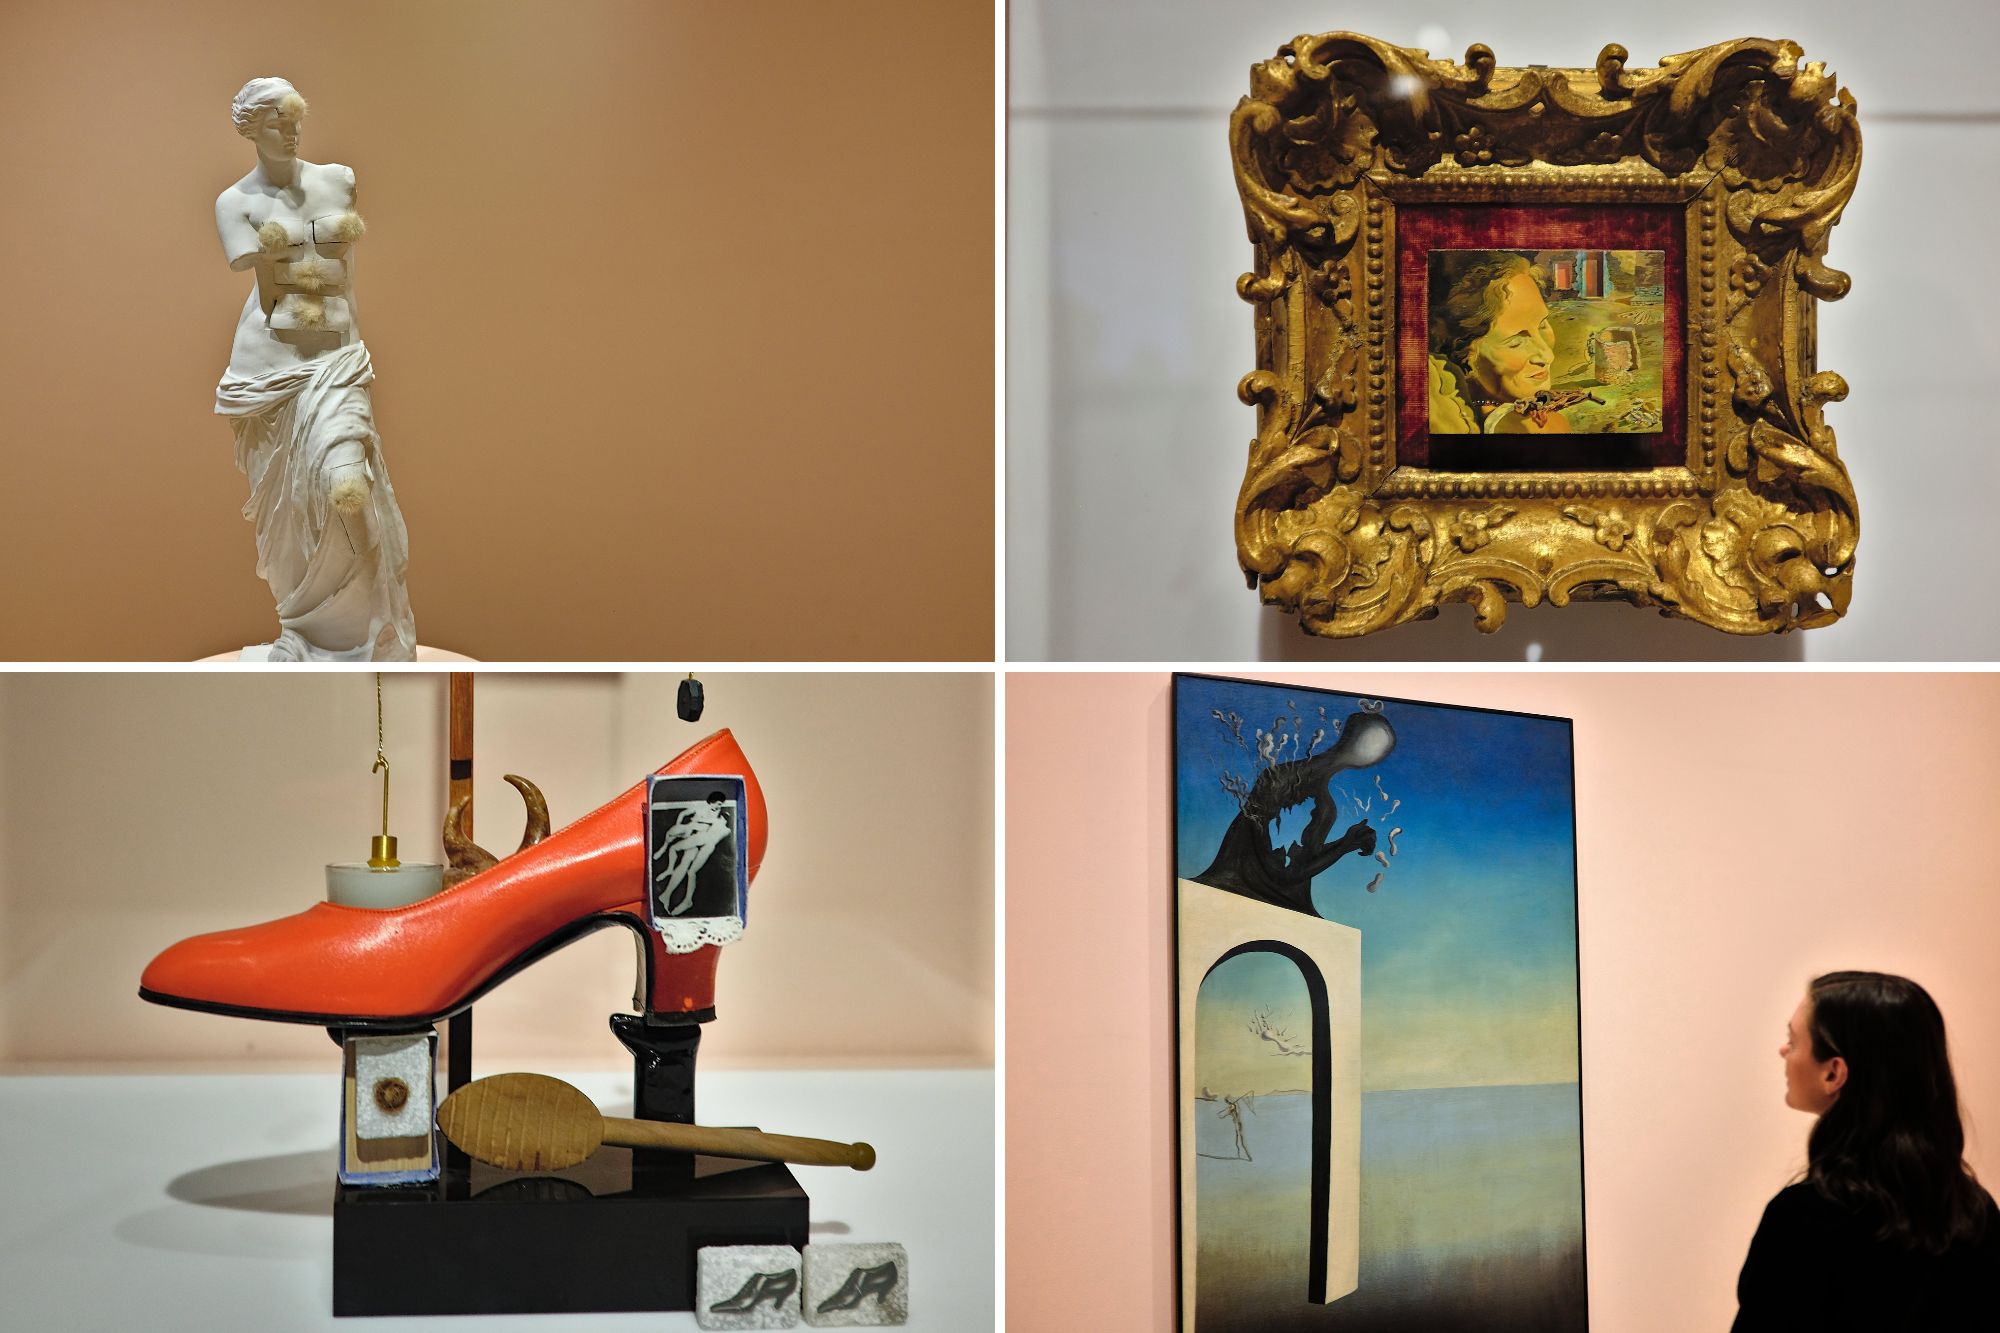 A collage of four images from the exhibit Salvador Dalí: The Image Disappears